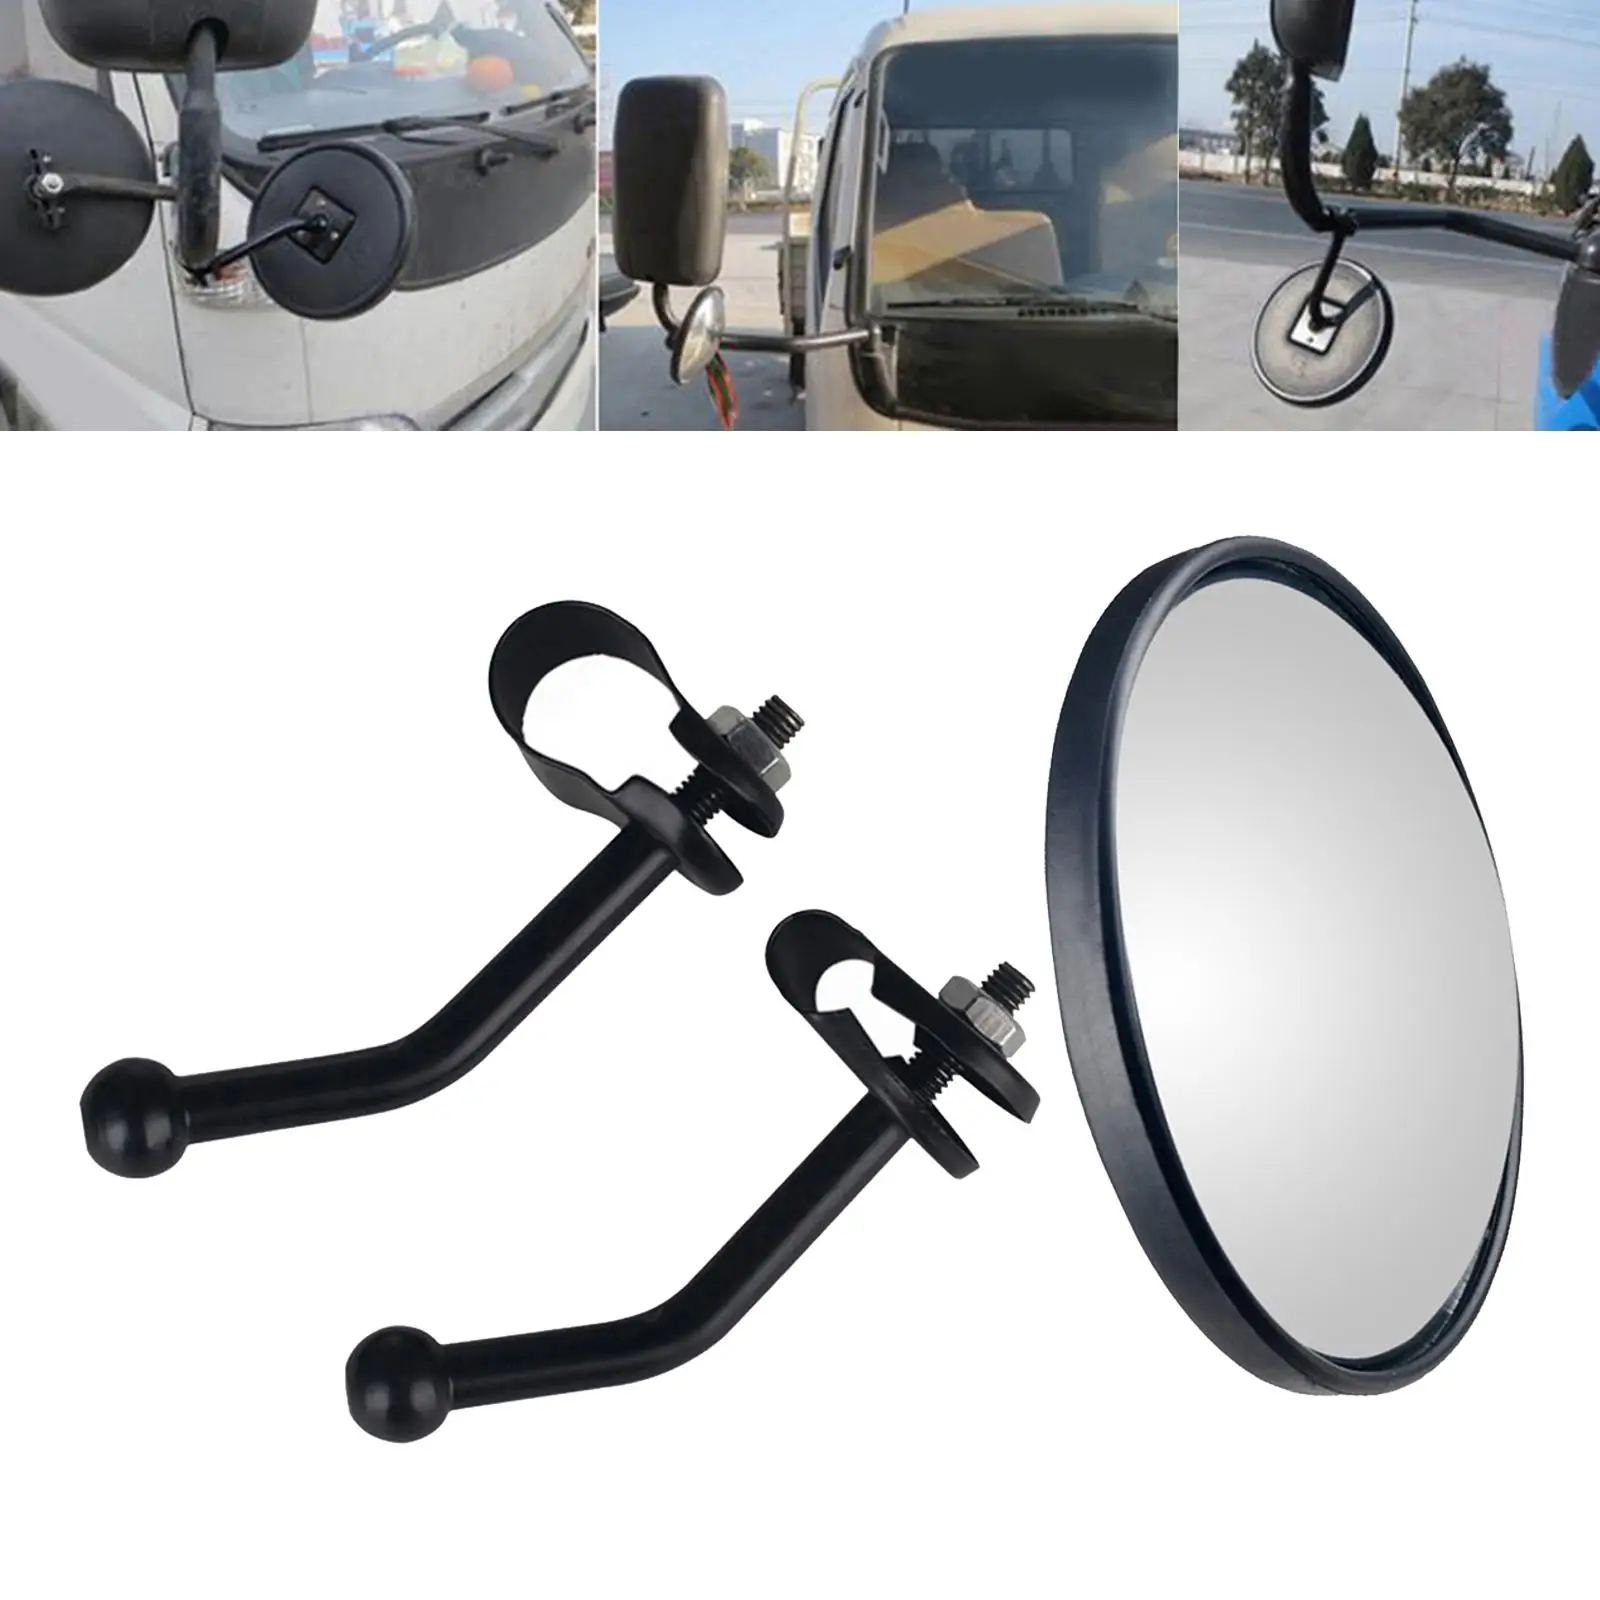 Blind Spot Mirrors Replacement Car Auxiliary Accessories Large View Field Wide Angle Rearview Round Convex Mirror Fit for Truck